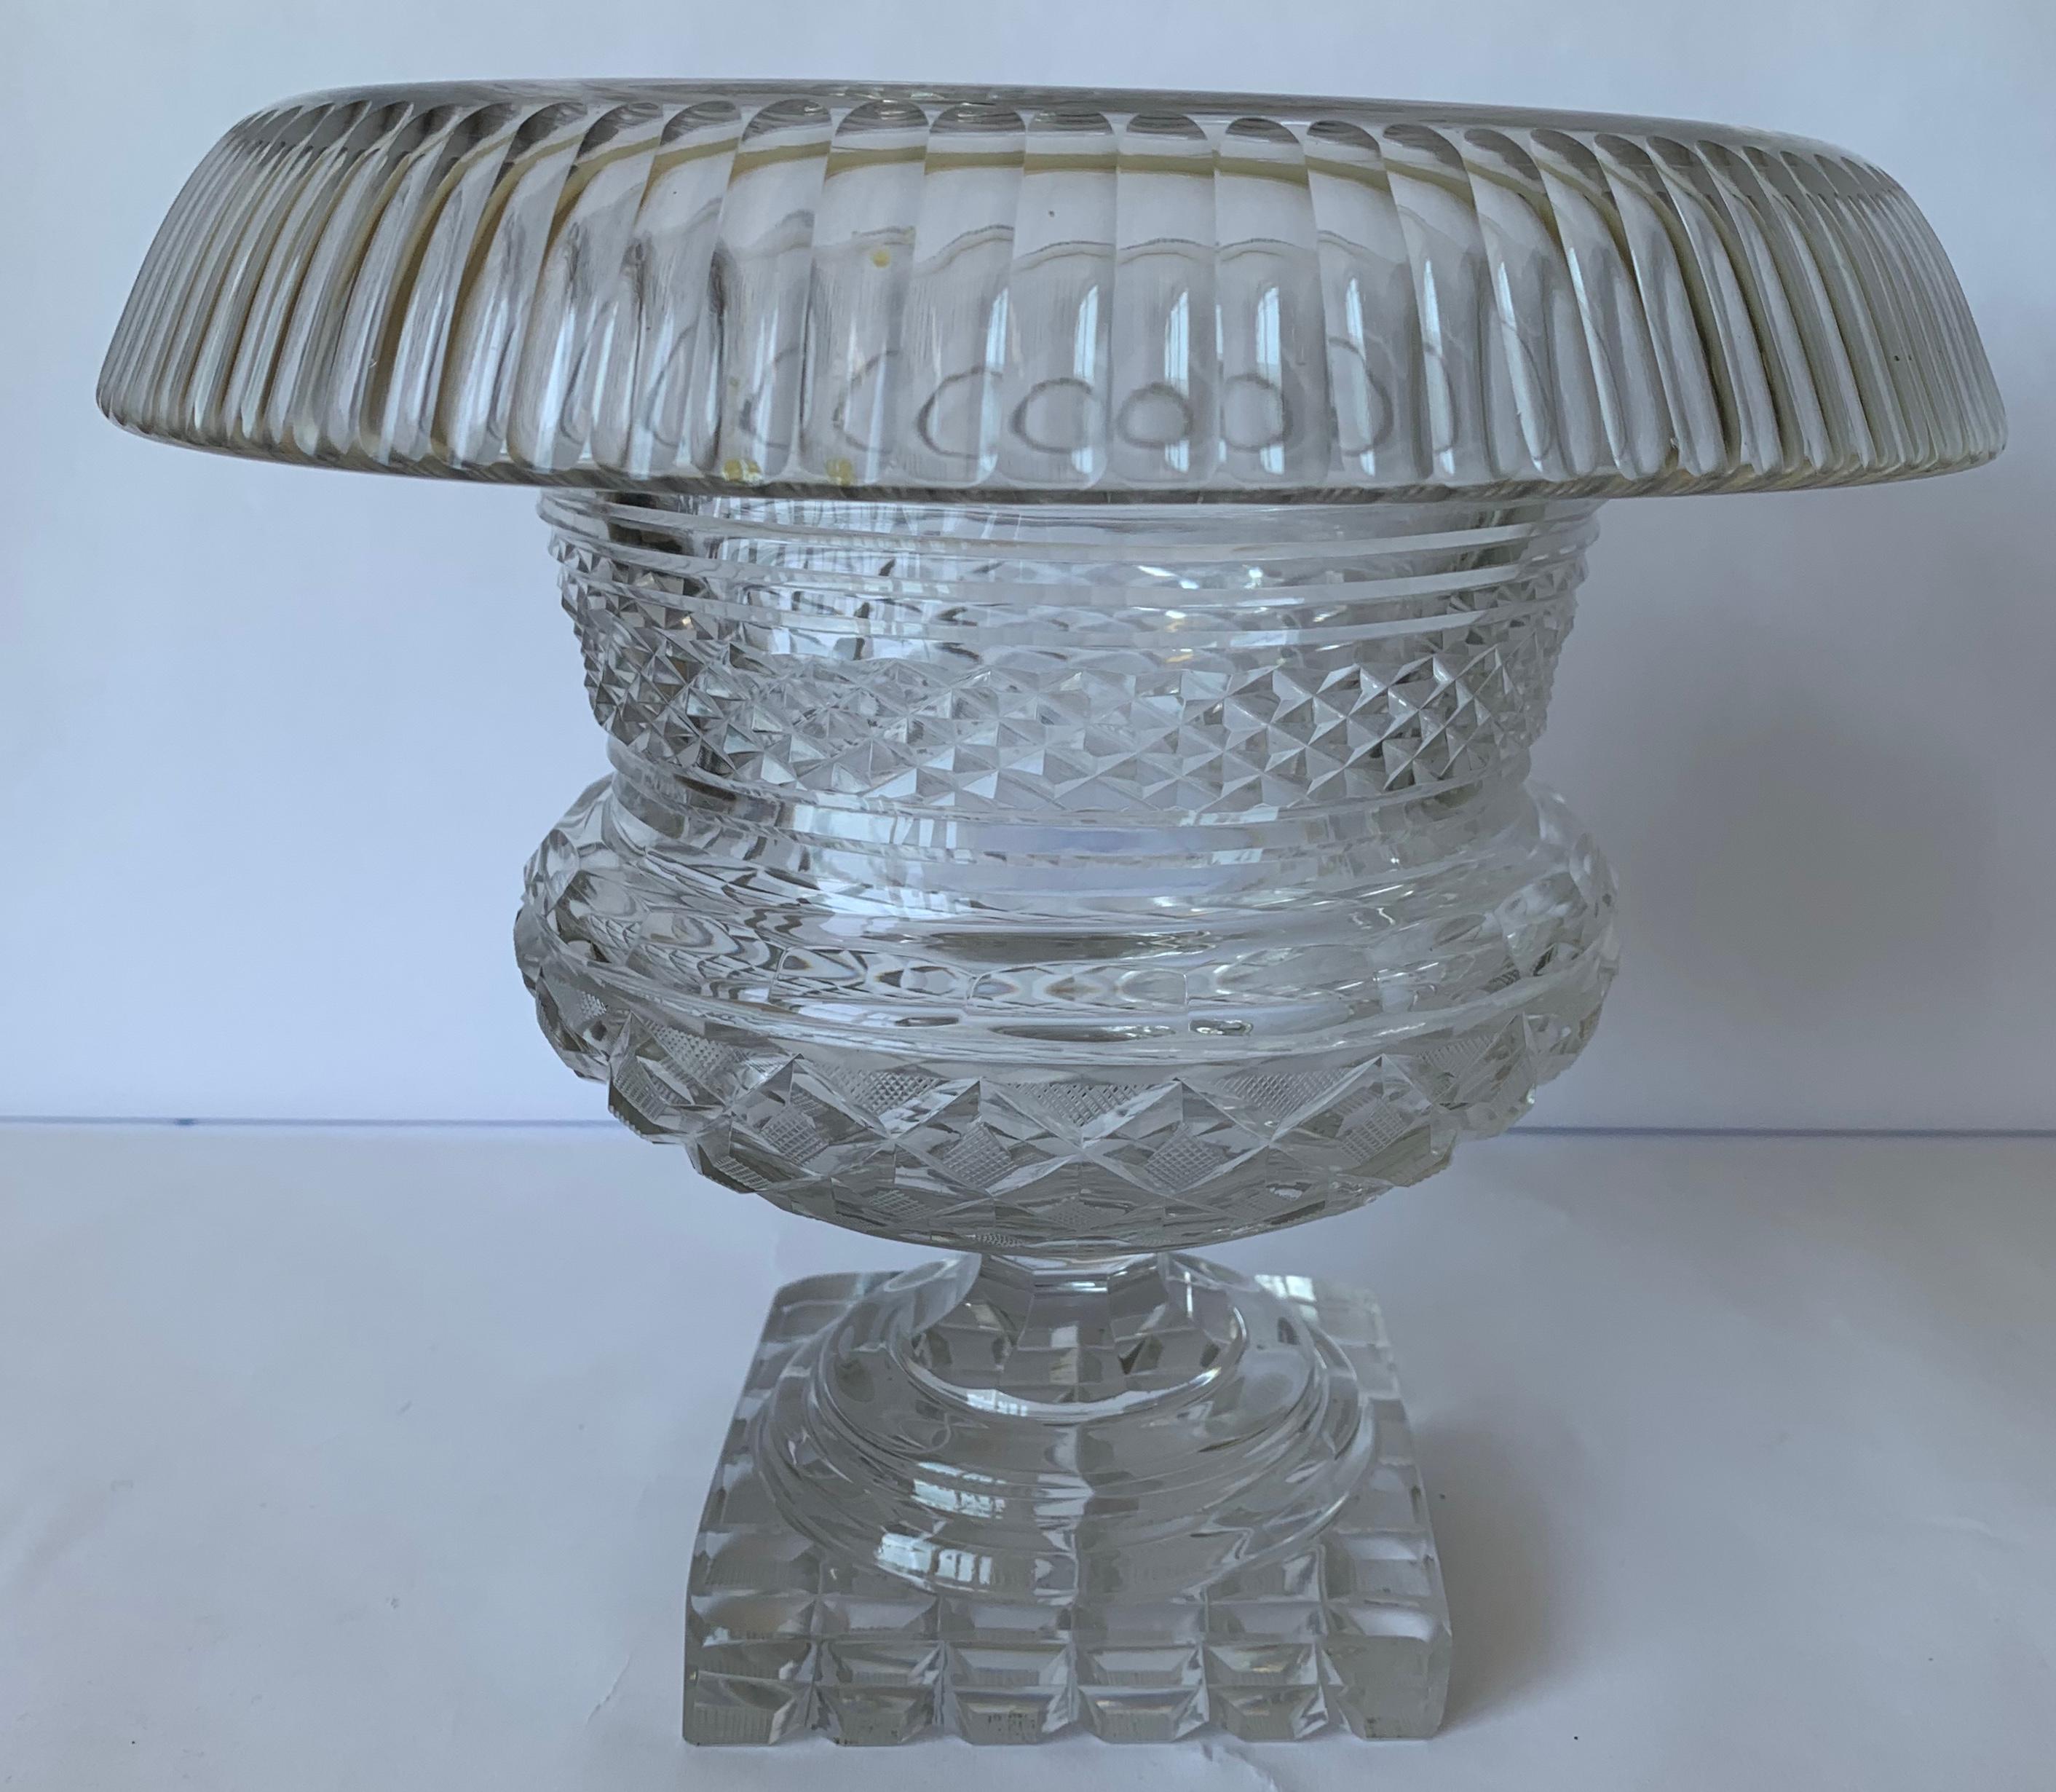 Anglo-Irish cut crystal footed center bowl circa 1820. Excellent cutting throughout with unusual rolled and turned fluted edge. Campana form with round stepped base on square plinth. Strawberry diamond cutting on bowl and bottom. No makers mark or